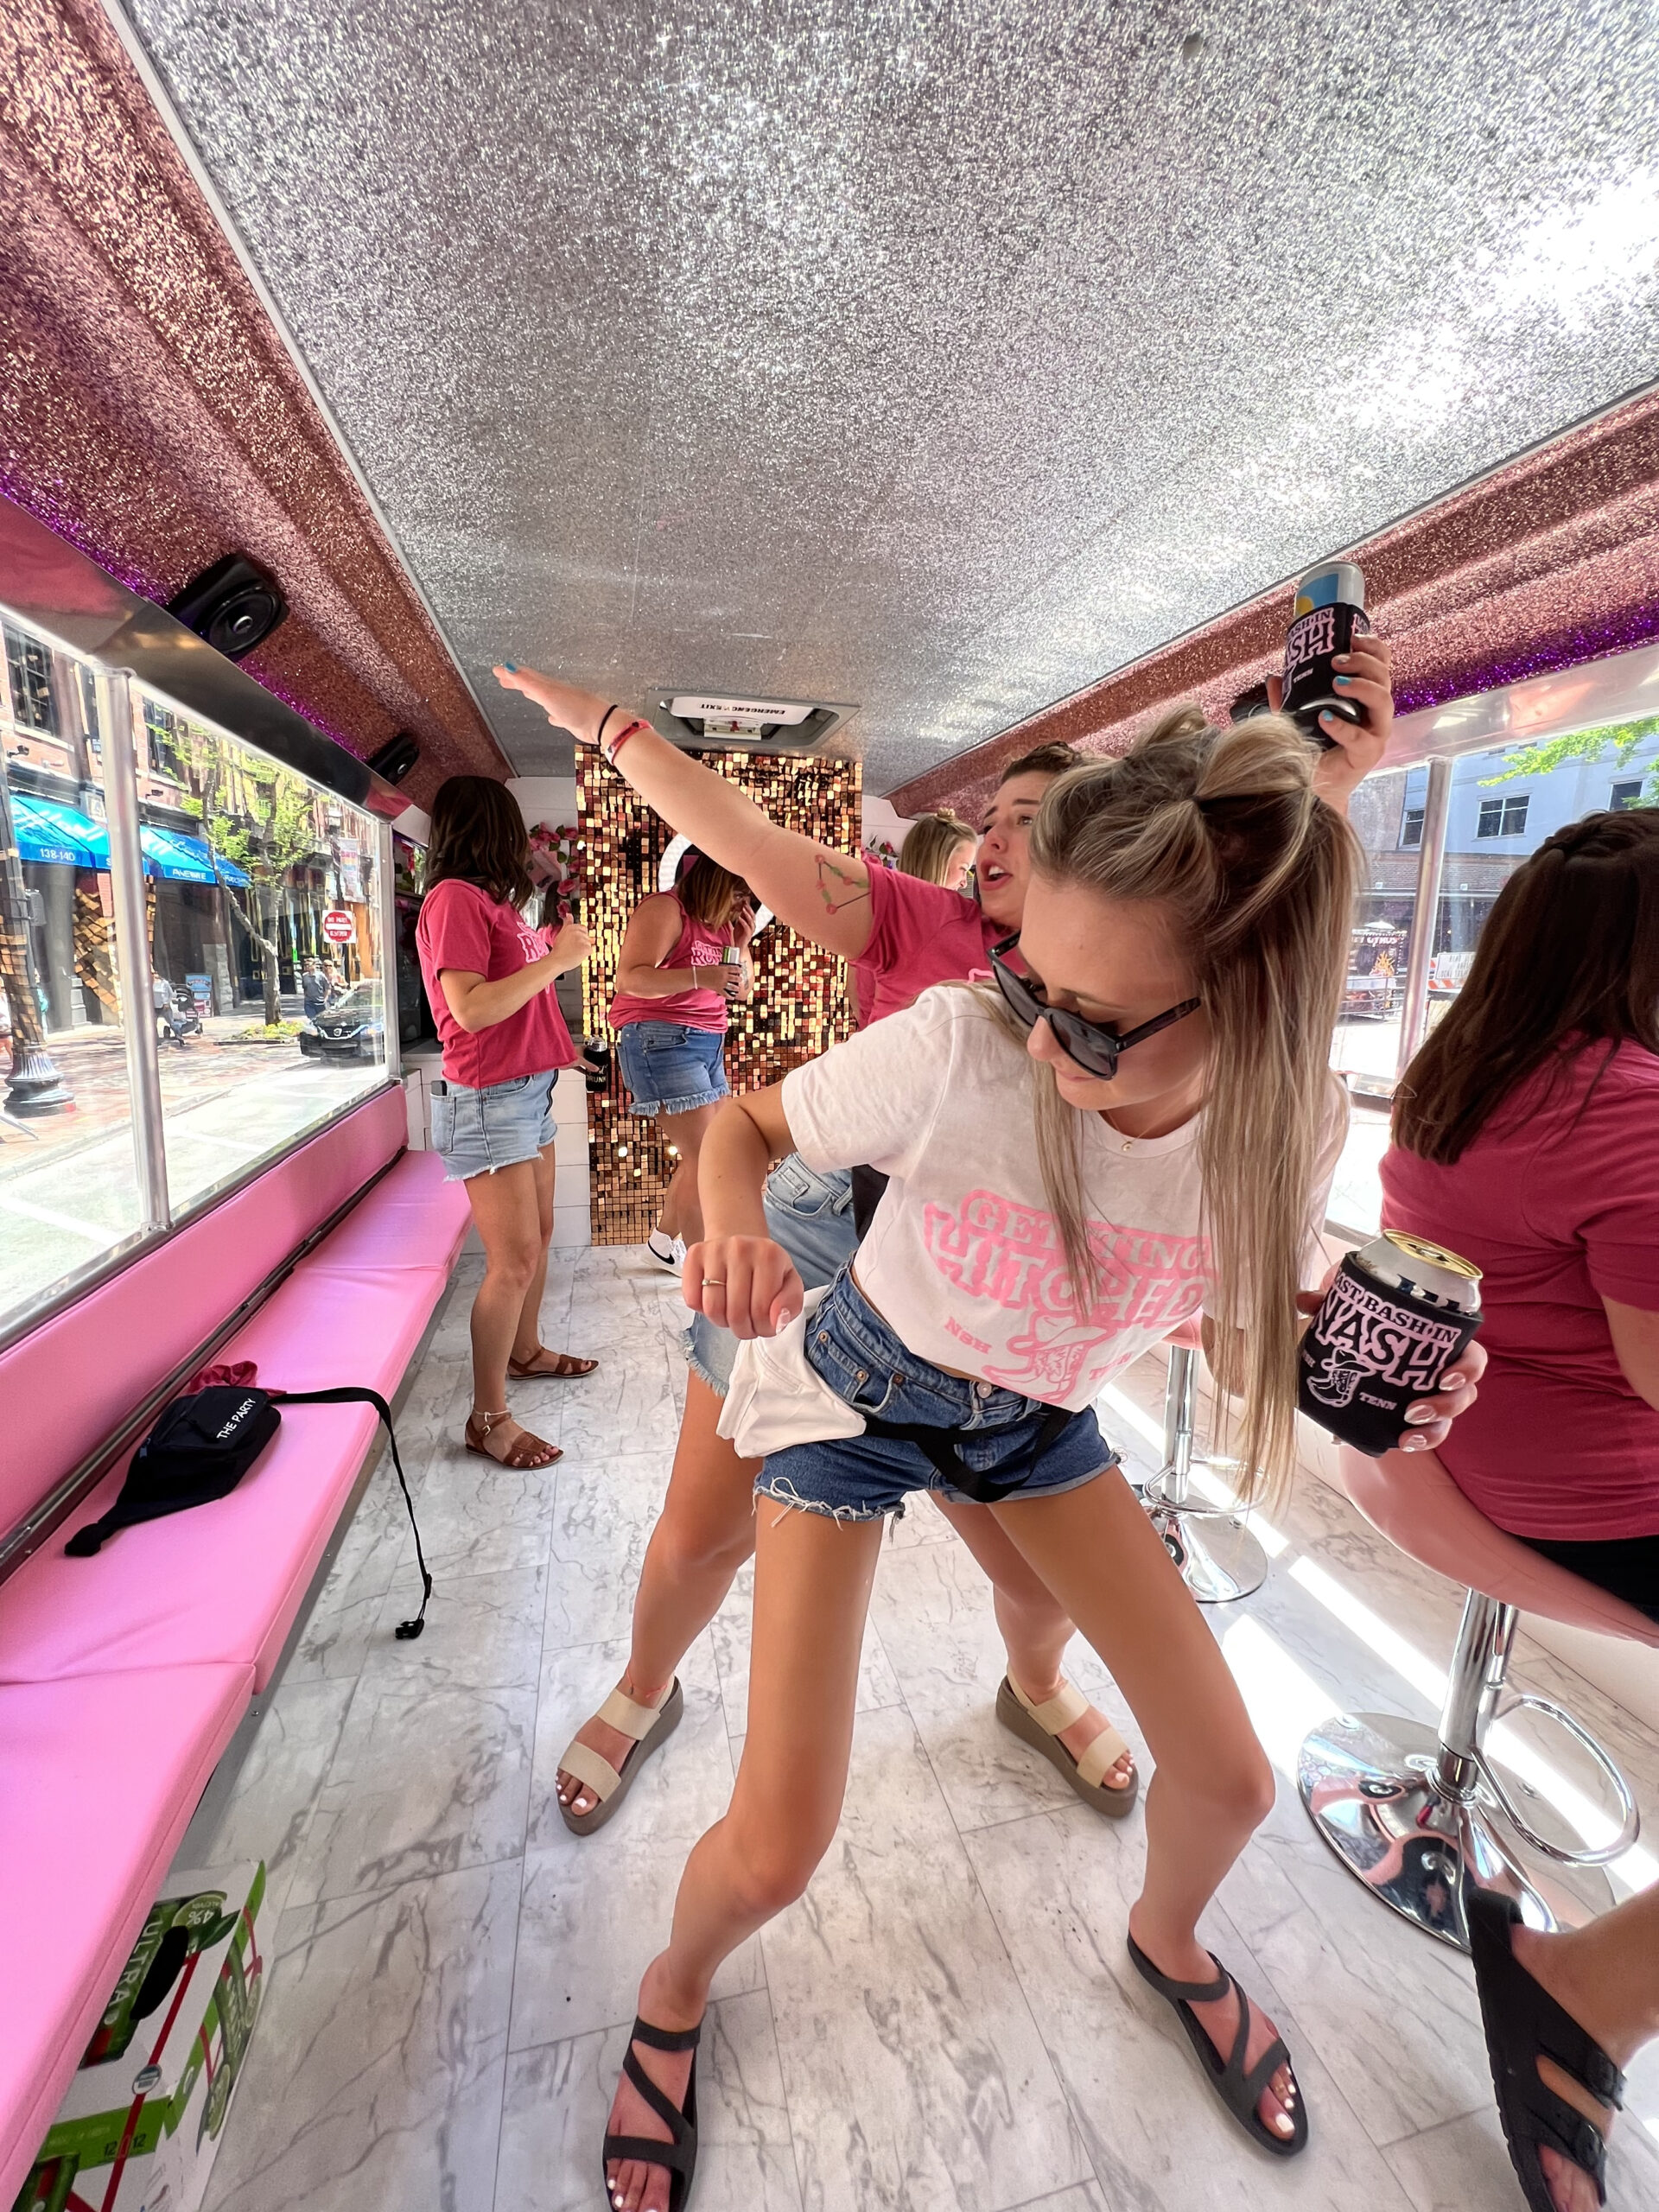 Dancing on a Party Bus in Nashville, TN.